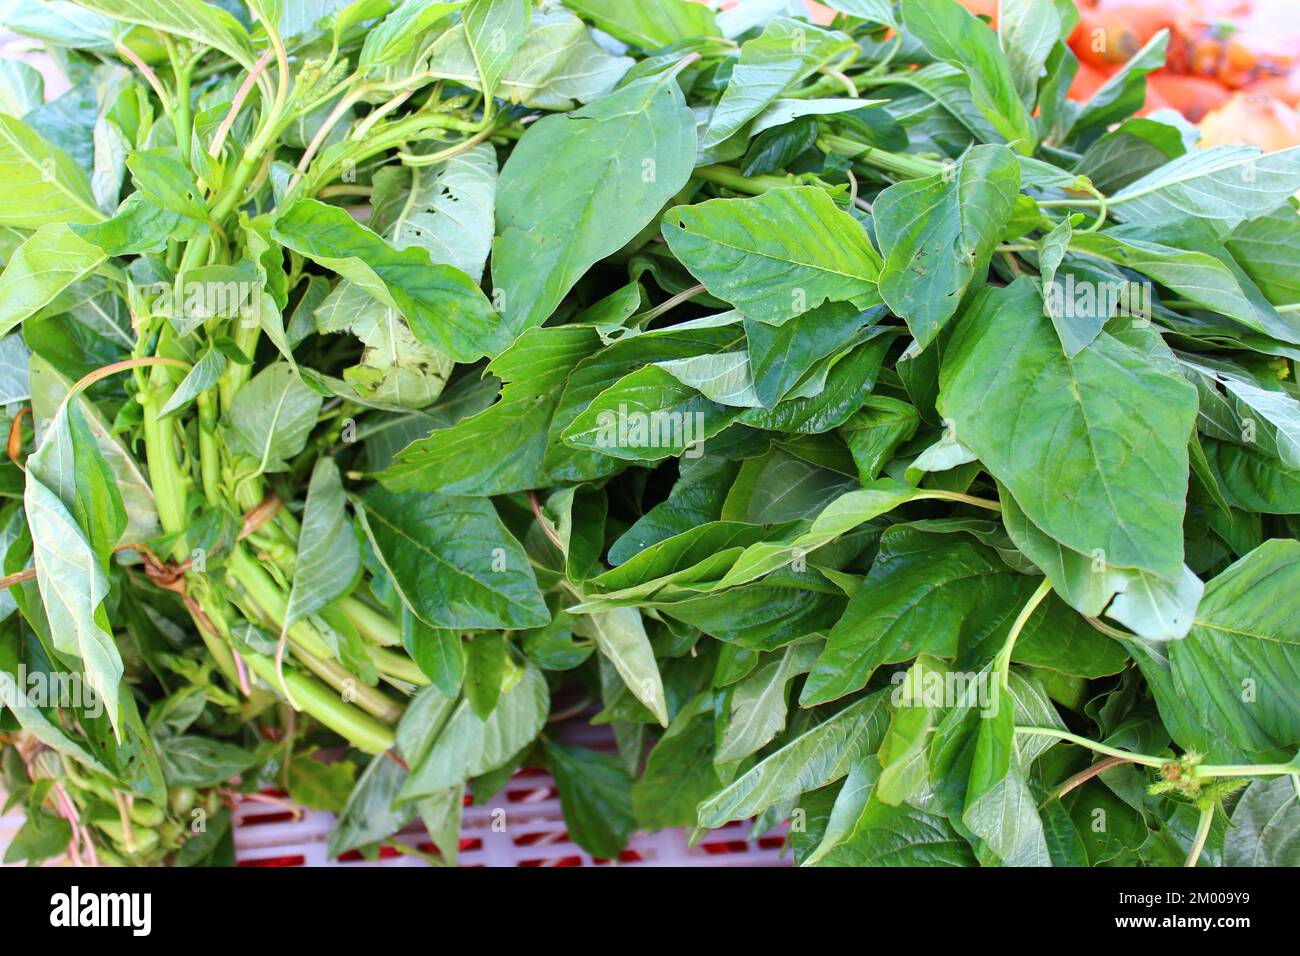 bunches of traditional Caribbean leaf vegetable Amaranth or Callaloo for sale on a market stall Stock Photo